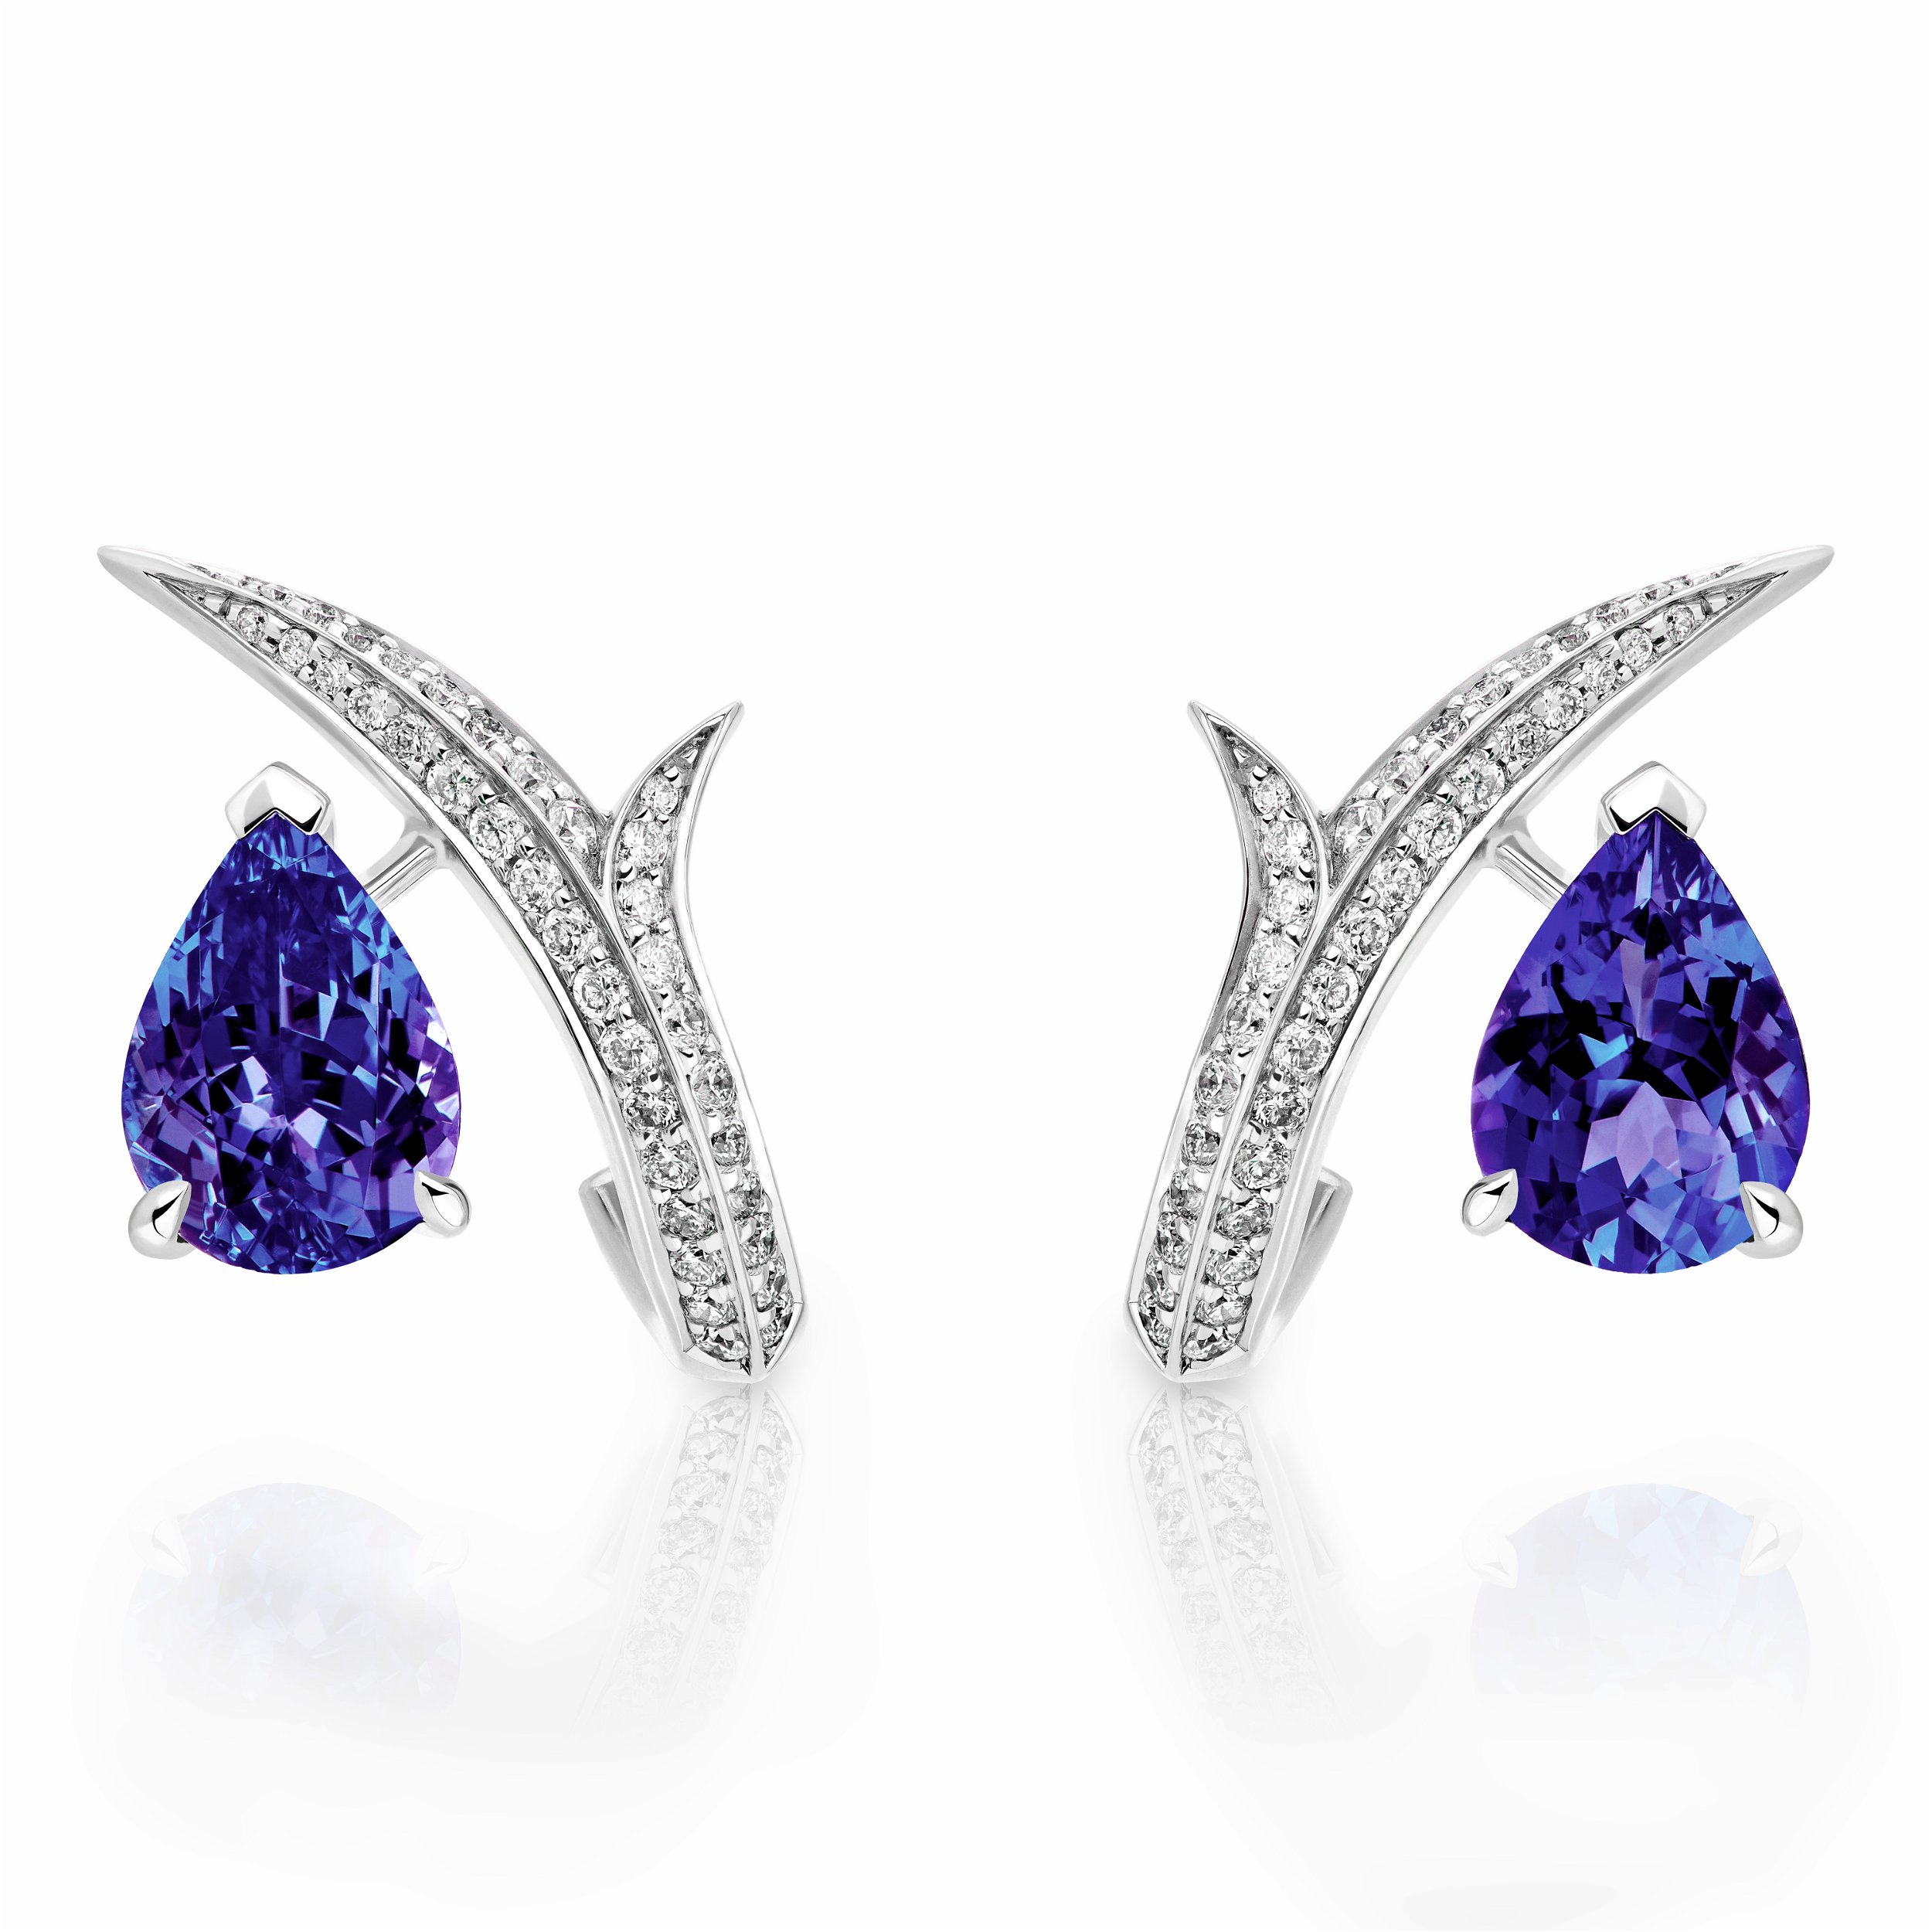 Thorn Embrace Pear Stud Earrings with Tanzanite and White Diamonds in 18kt White Gold